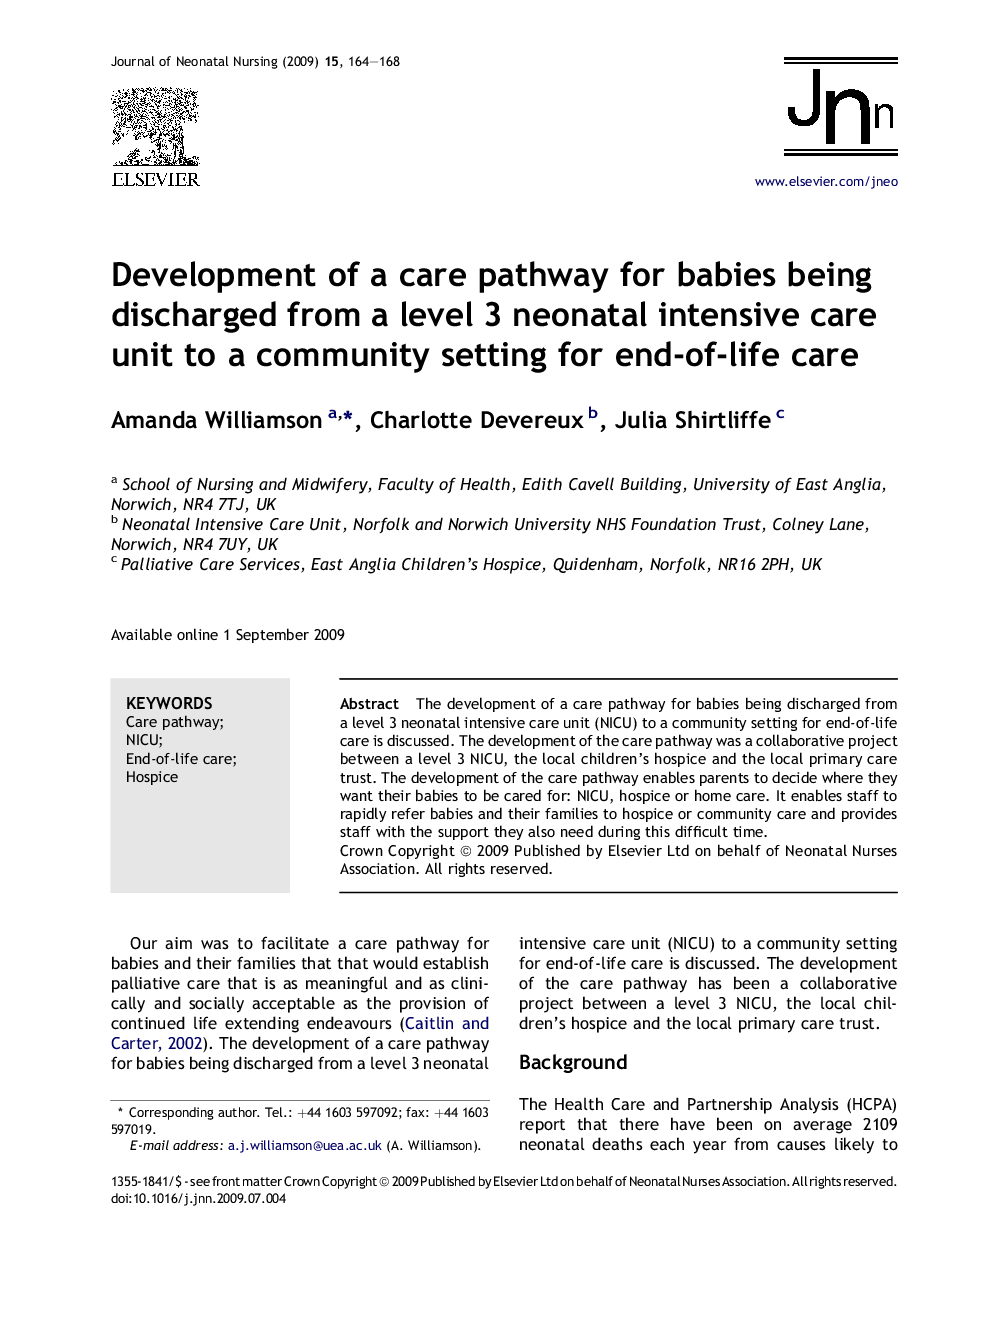 Development of a care pathway for babies being discharged from a level 3 neonatal intensive care unit to a community setting for end-of-life care